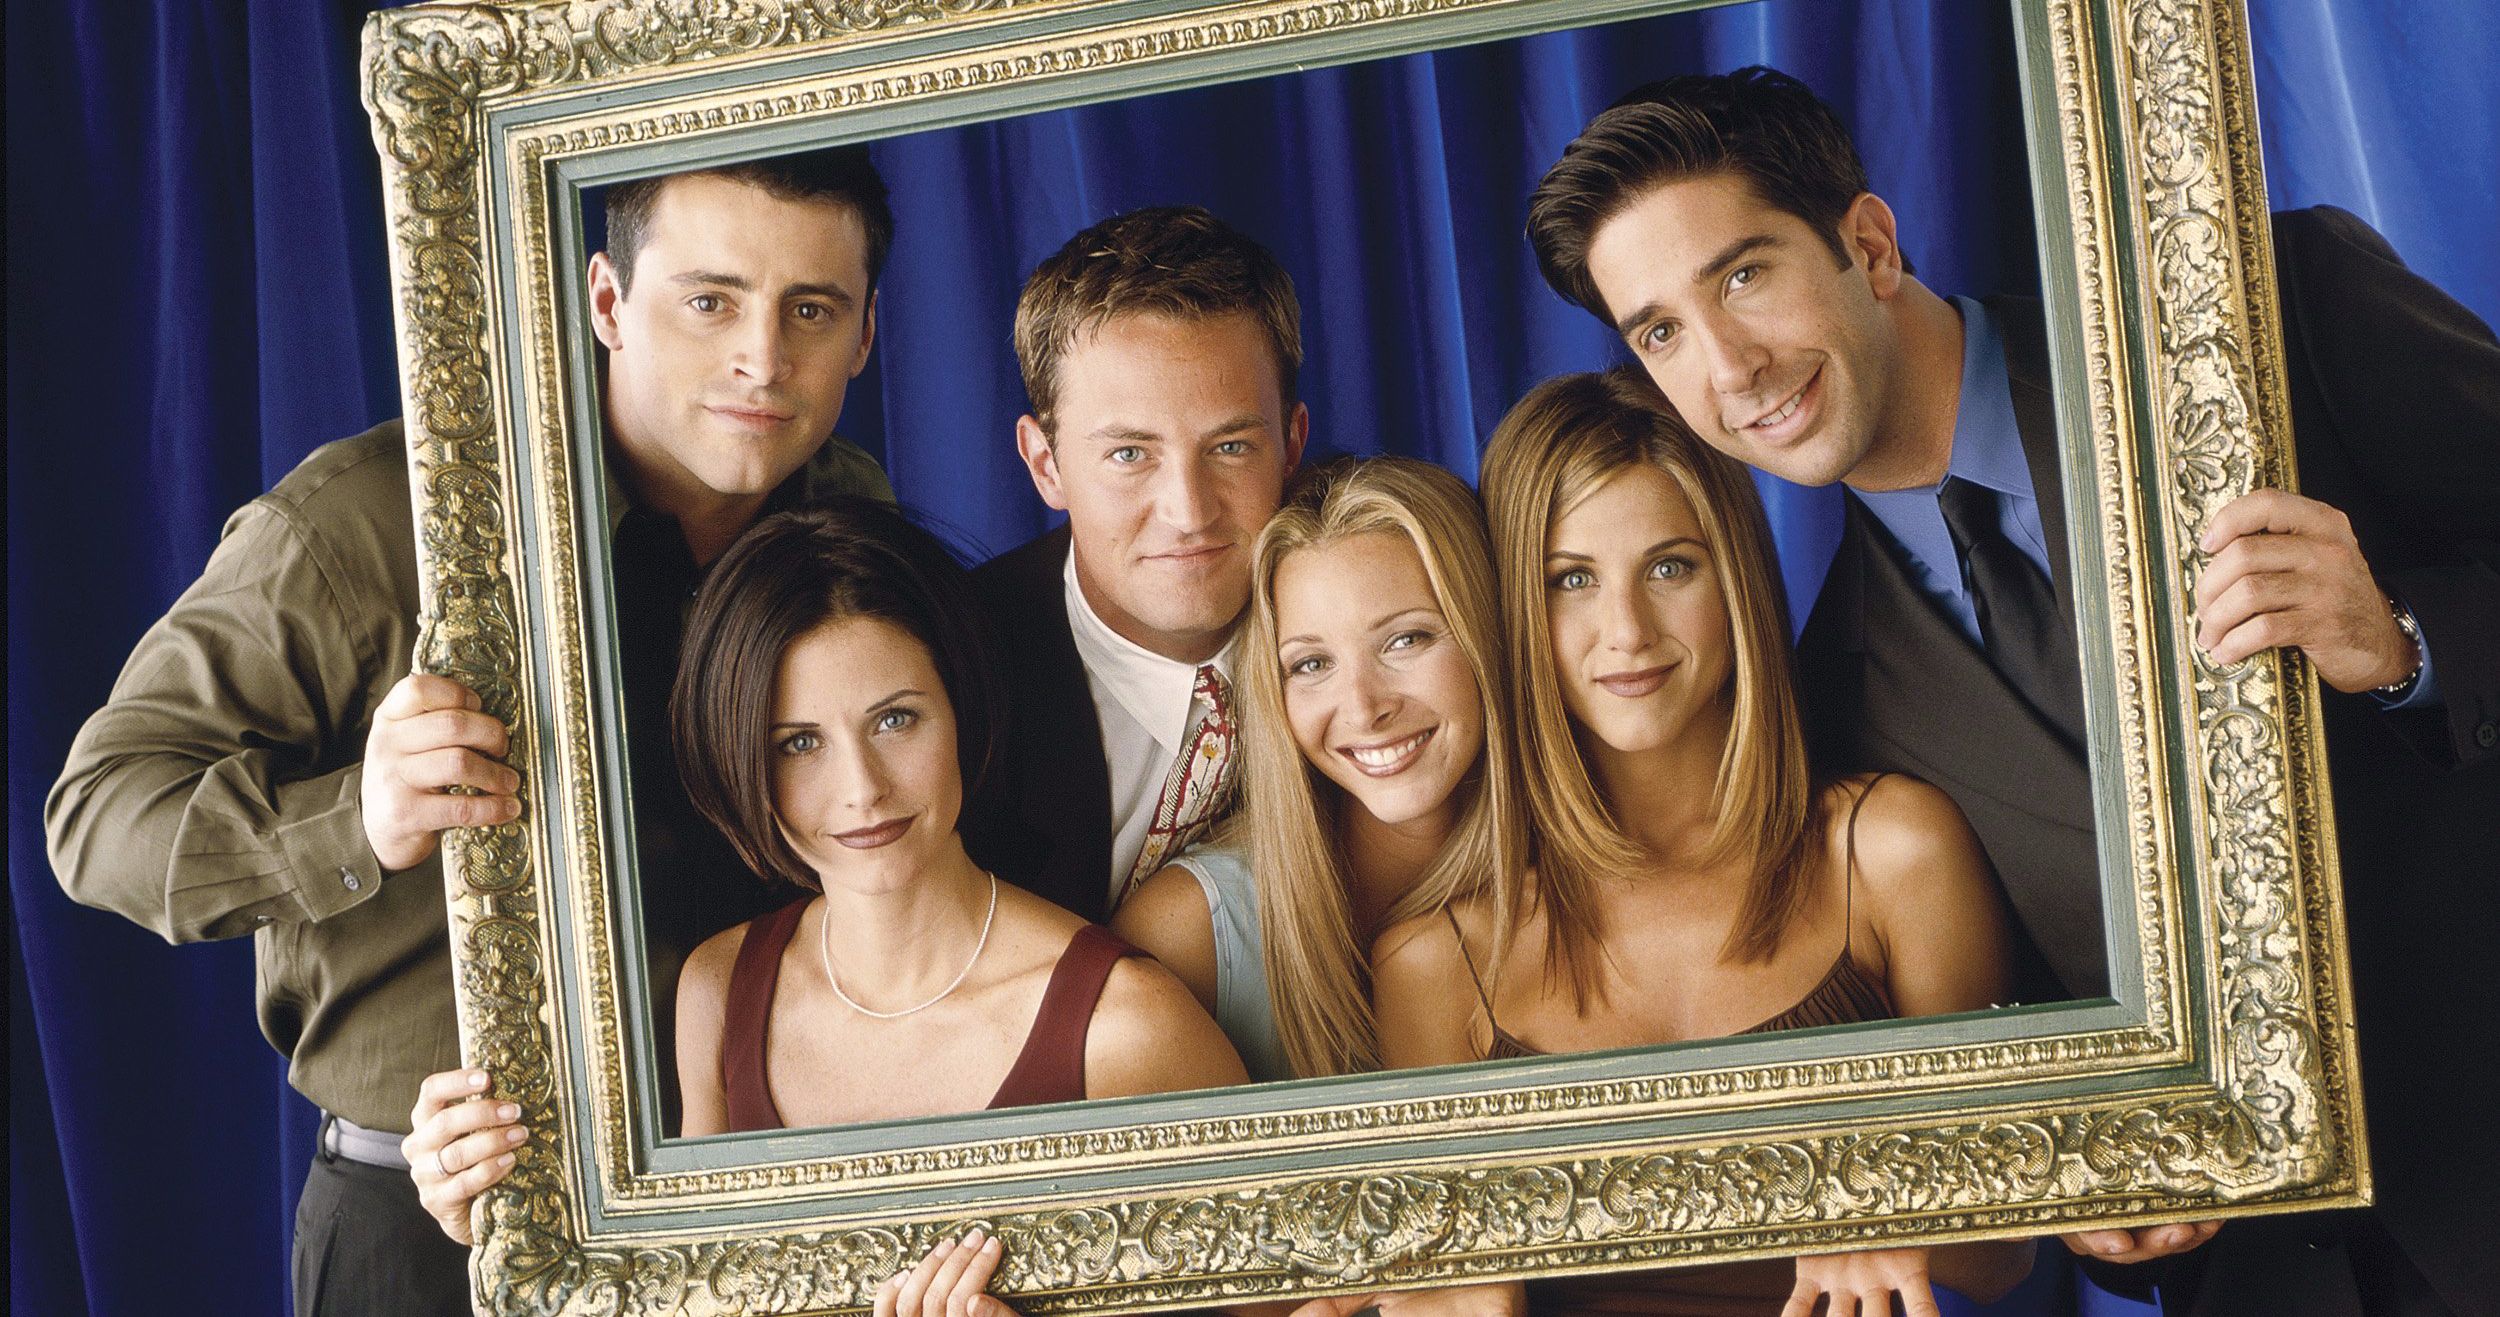 Friends Reunion Special on HBO Max Has Been Postponed